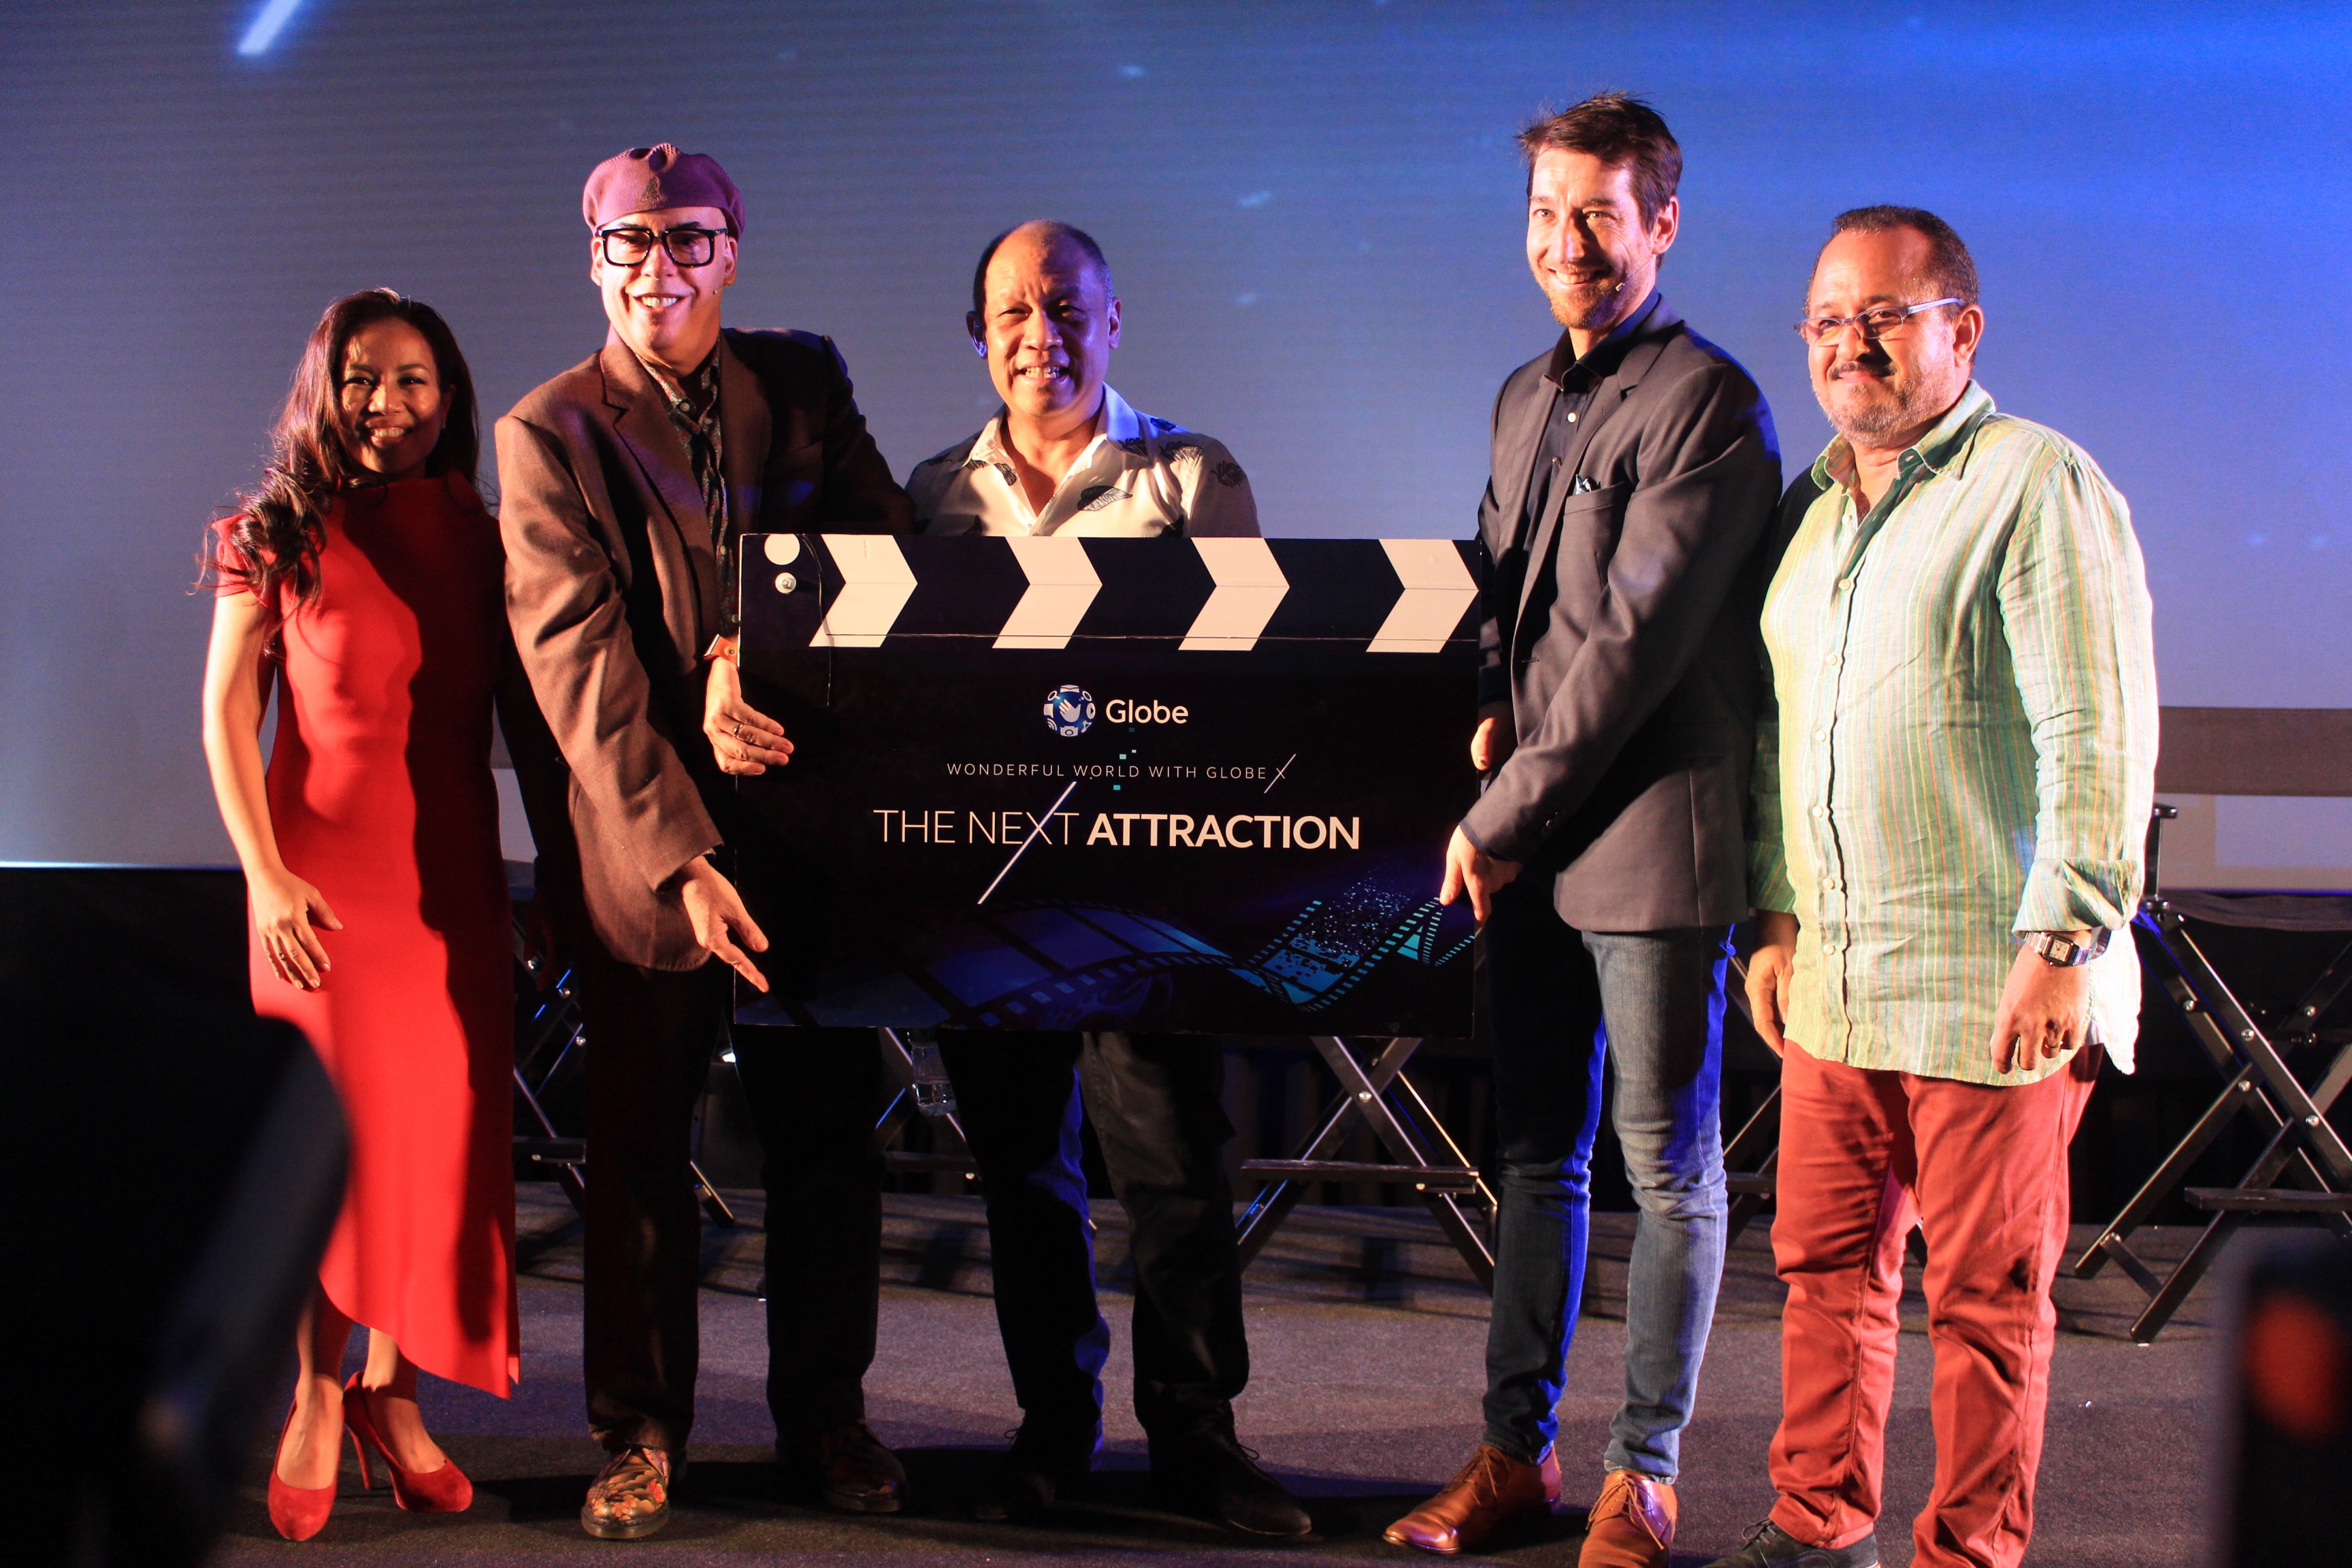 Changing the landscape of Philippine entertainment with recent launch of Globe Studios and Globe Live along with the announcement of new international content partners namely Disney, Astro, Turner, Smule, Sports Illustrated and Netflix. Photo above shows Globe executives officially unveiling its newest suite of entertainment content. Globe President and CEO Ernest Cu (Center) leads the ceremony, joined by (from left to right) Vice President for Content Jil Go, Head for Stores and Retail Transformation Management Joe Caliro, Senior Advisor for Consumer Business Dan Horan and Chief Commercial Officer Alberto De Larrazabal.